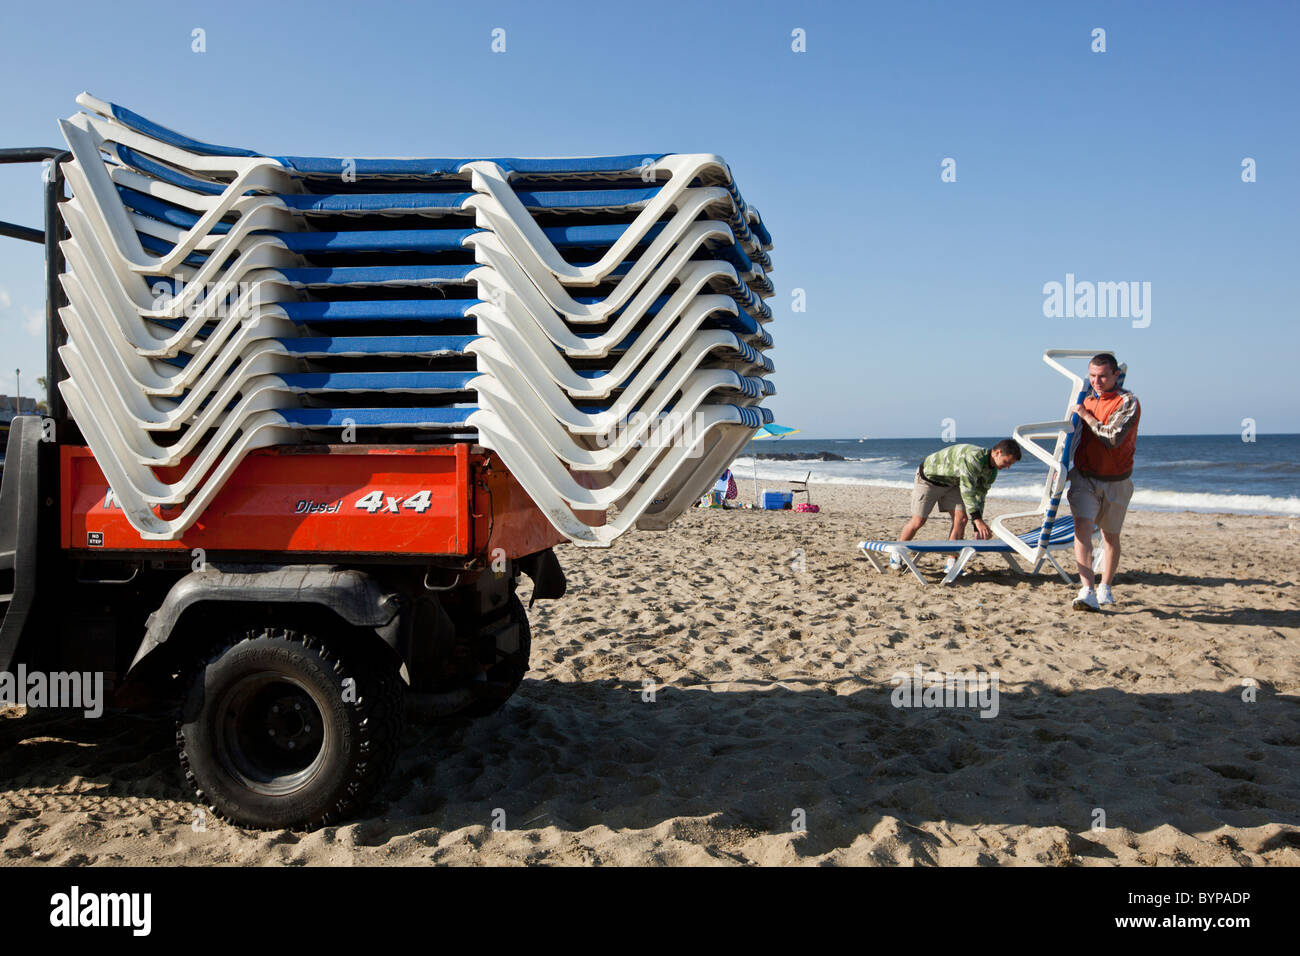 USA, New Jersey, Monmouth Beach, Young men collect resort beach chairs on empty beach on cool early summer afternoon Stock Photo